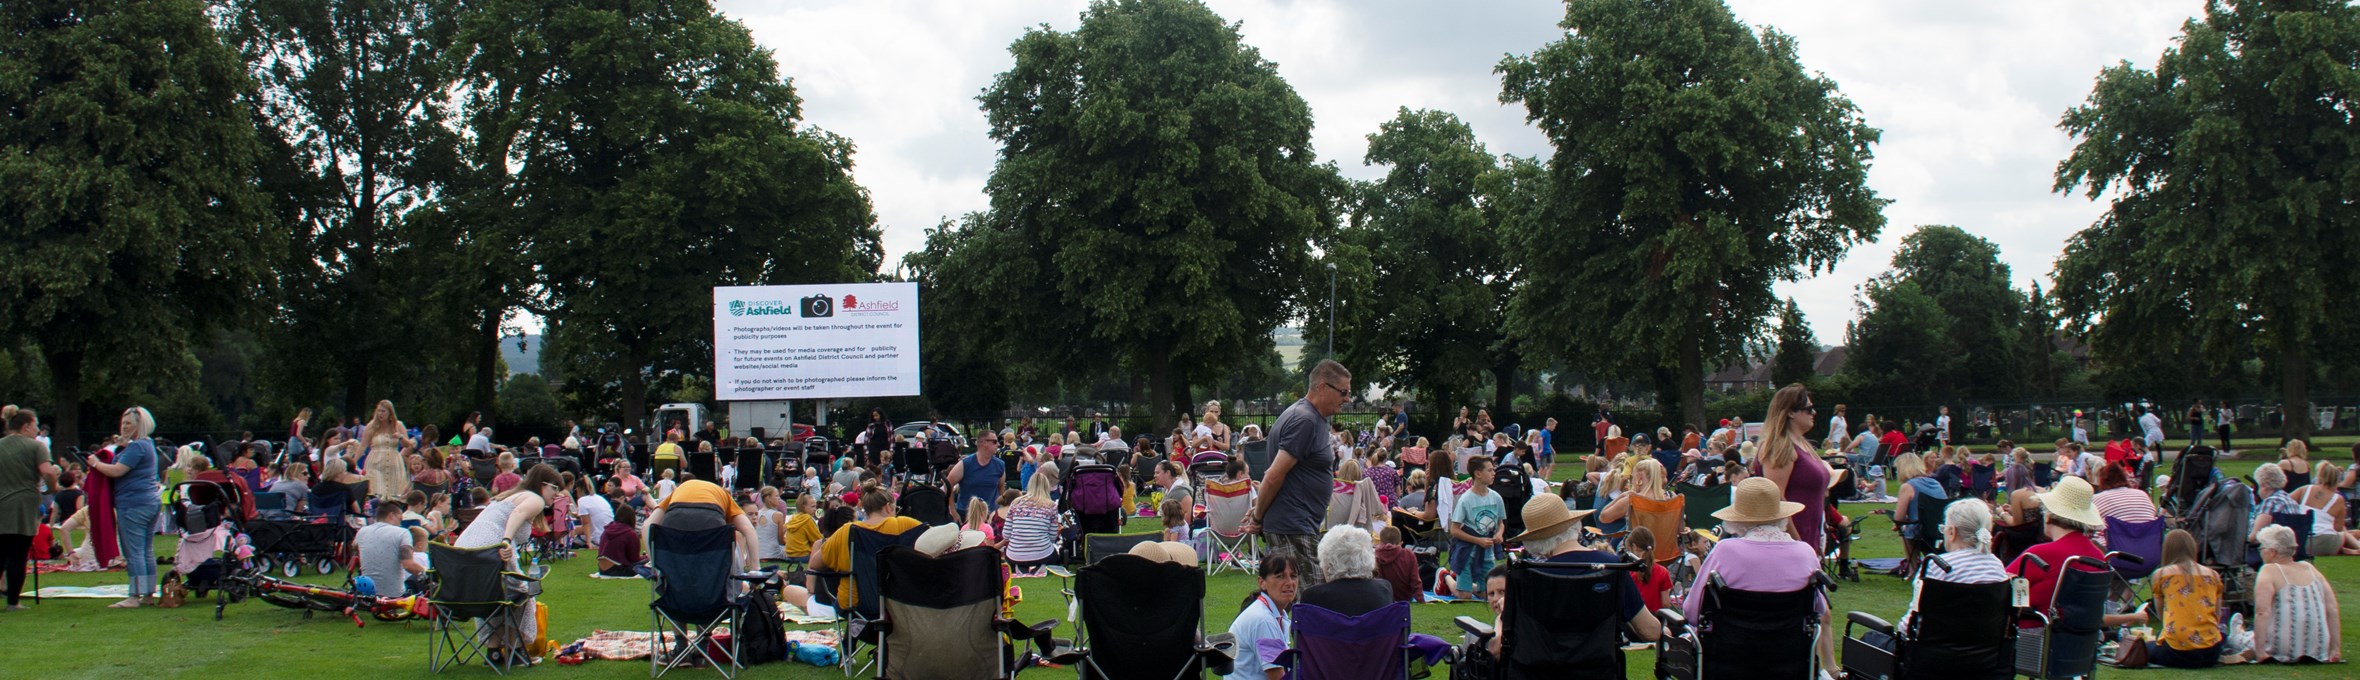 hundreds of people sitting on fold out chairs watching a big screen on Titchfield Park 